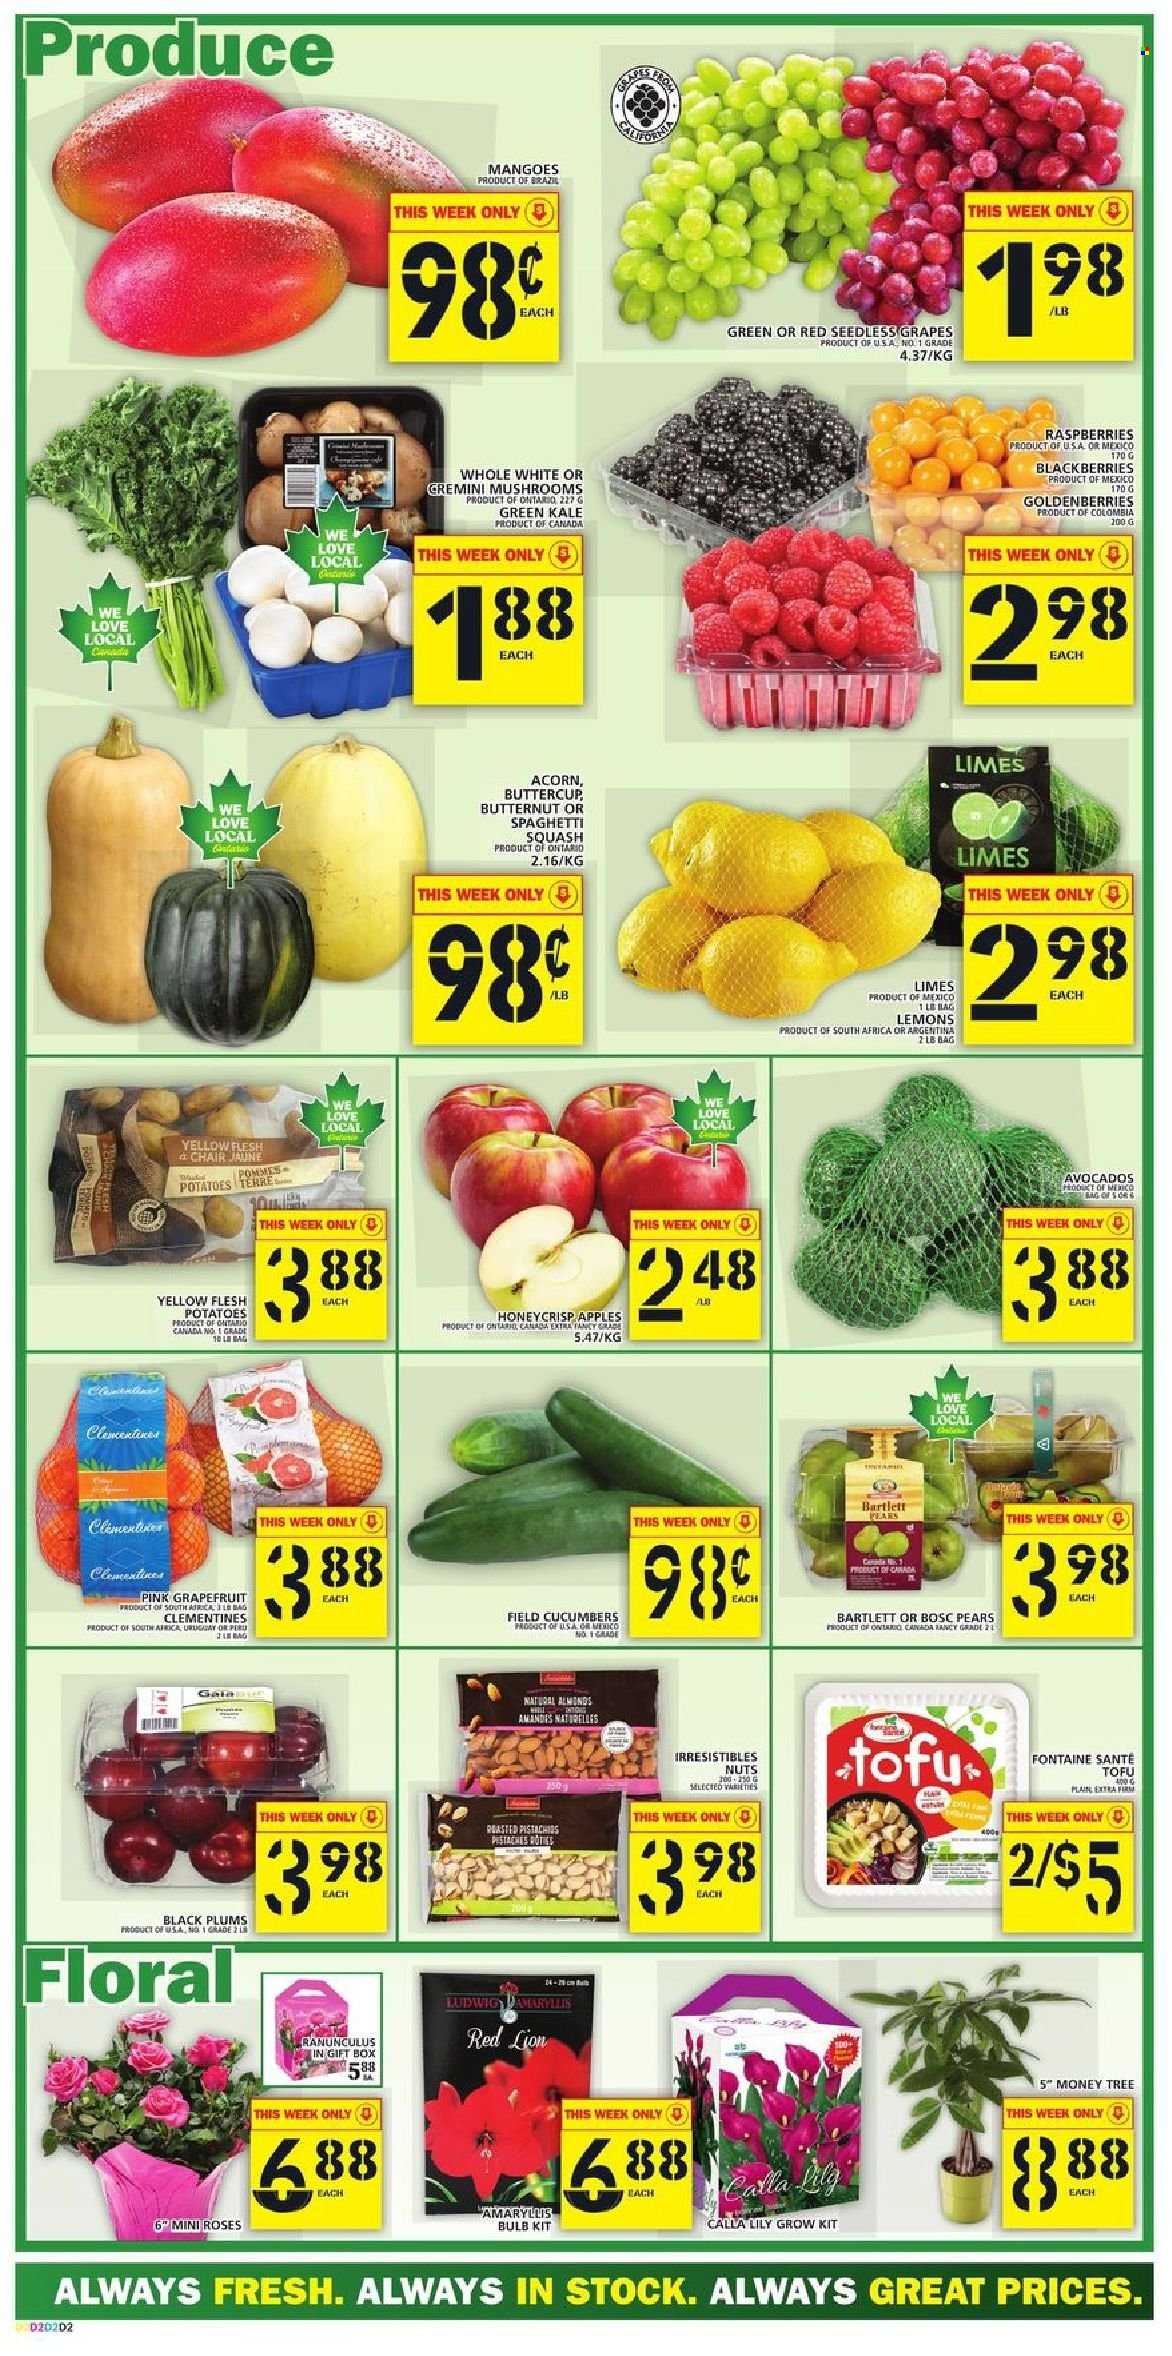 thumbnail - Food Basics Flyer - October 21, 2021 - October 27, 2021 - Sales products - mushrooms, butternut squash, cucumber, kale, potatoes, apples, avocado, Bartlett pears, blackberries, clementines, Gala, grapefruits, grapes, limes, mango, seedless grapes, plums, pears, lemons, black plums, tofu, almonds, pistachios, gift box, bulb. Page 2.